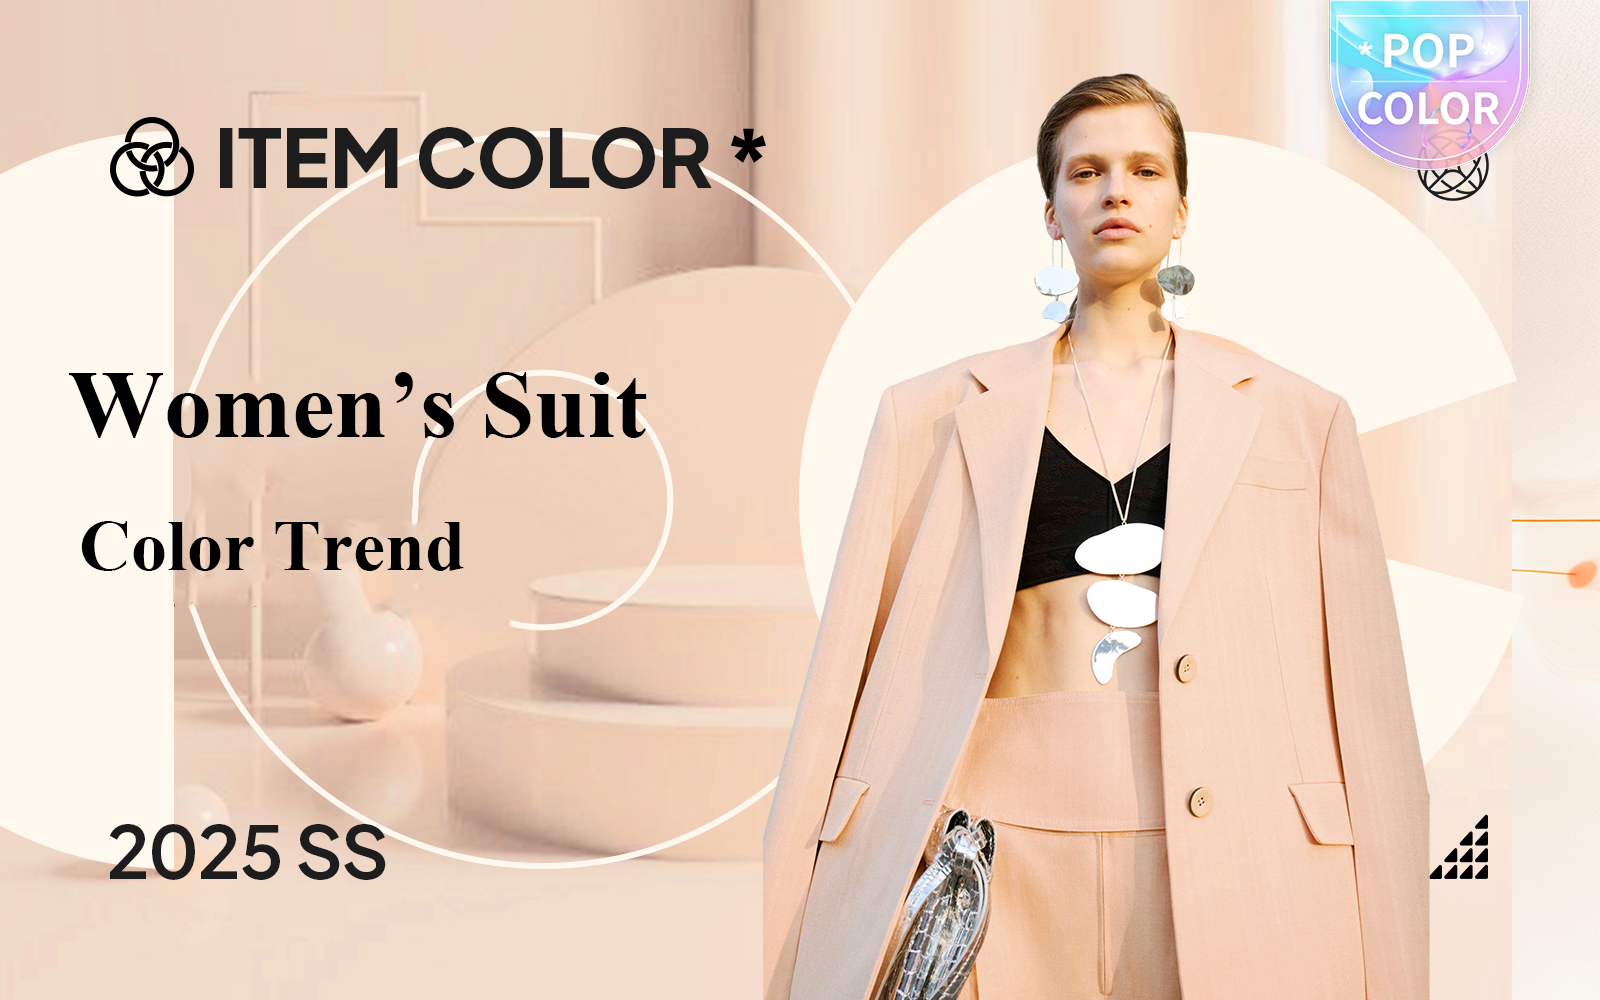 The Color Trend for Women's Suit